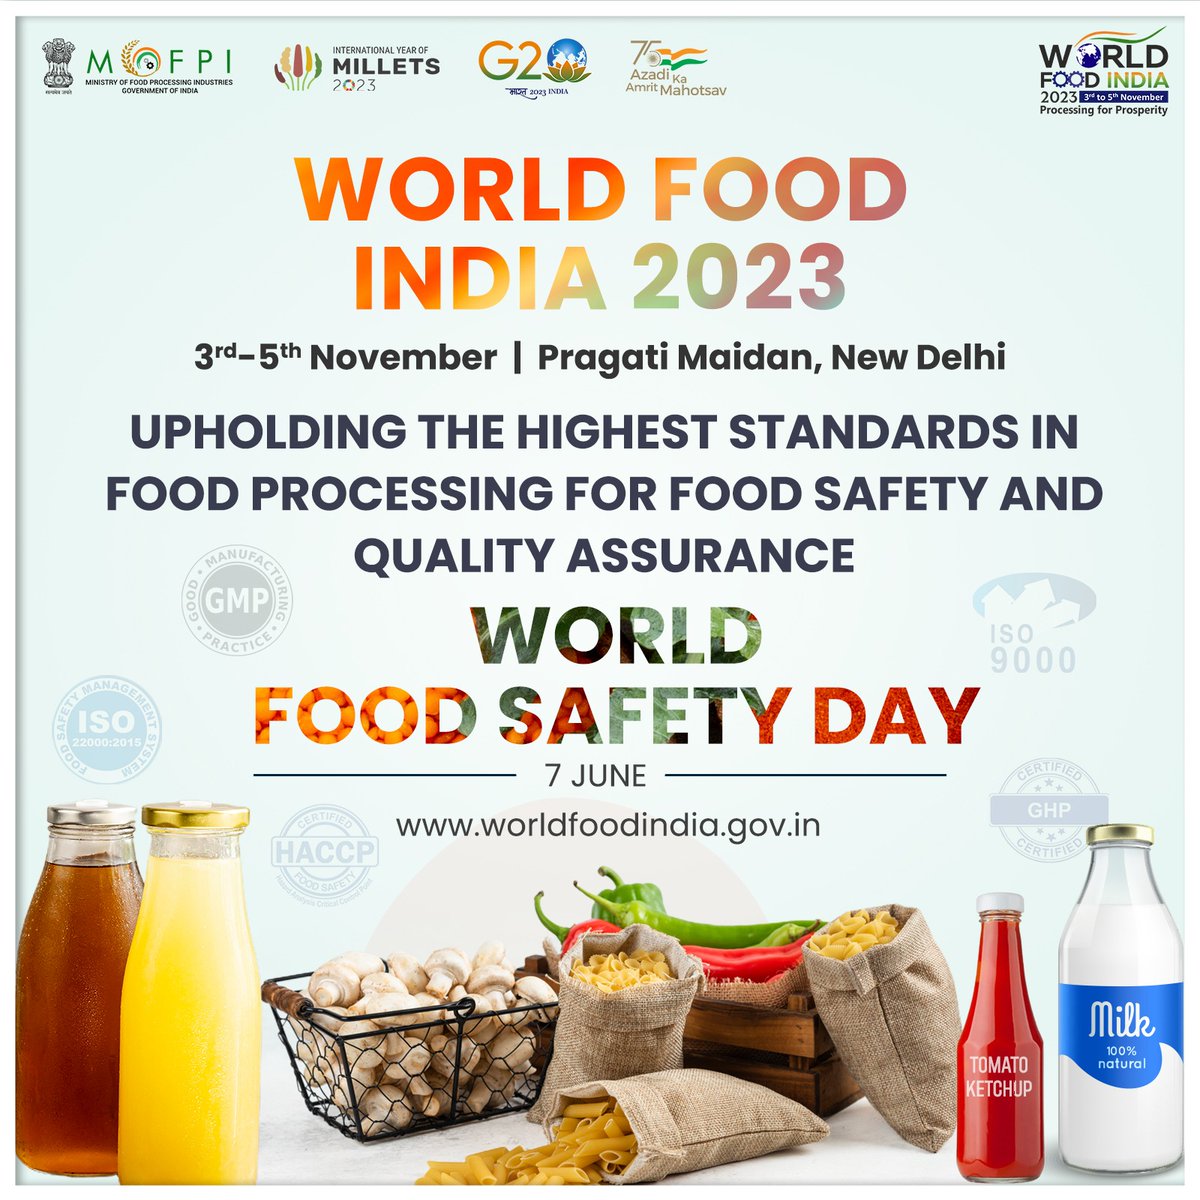 On June 7th, World Food Safety Day, we want to highlight the importance of stringent food safety standards in the food processing sector. WFI 2023 hopes to cultivate a culture of food safety amongst all stakeholders in the industry. We firmly believe that #FoodStandardsSaveLives!…